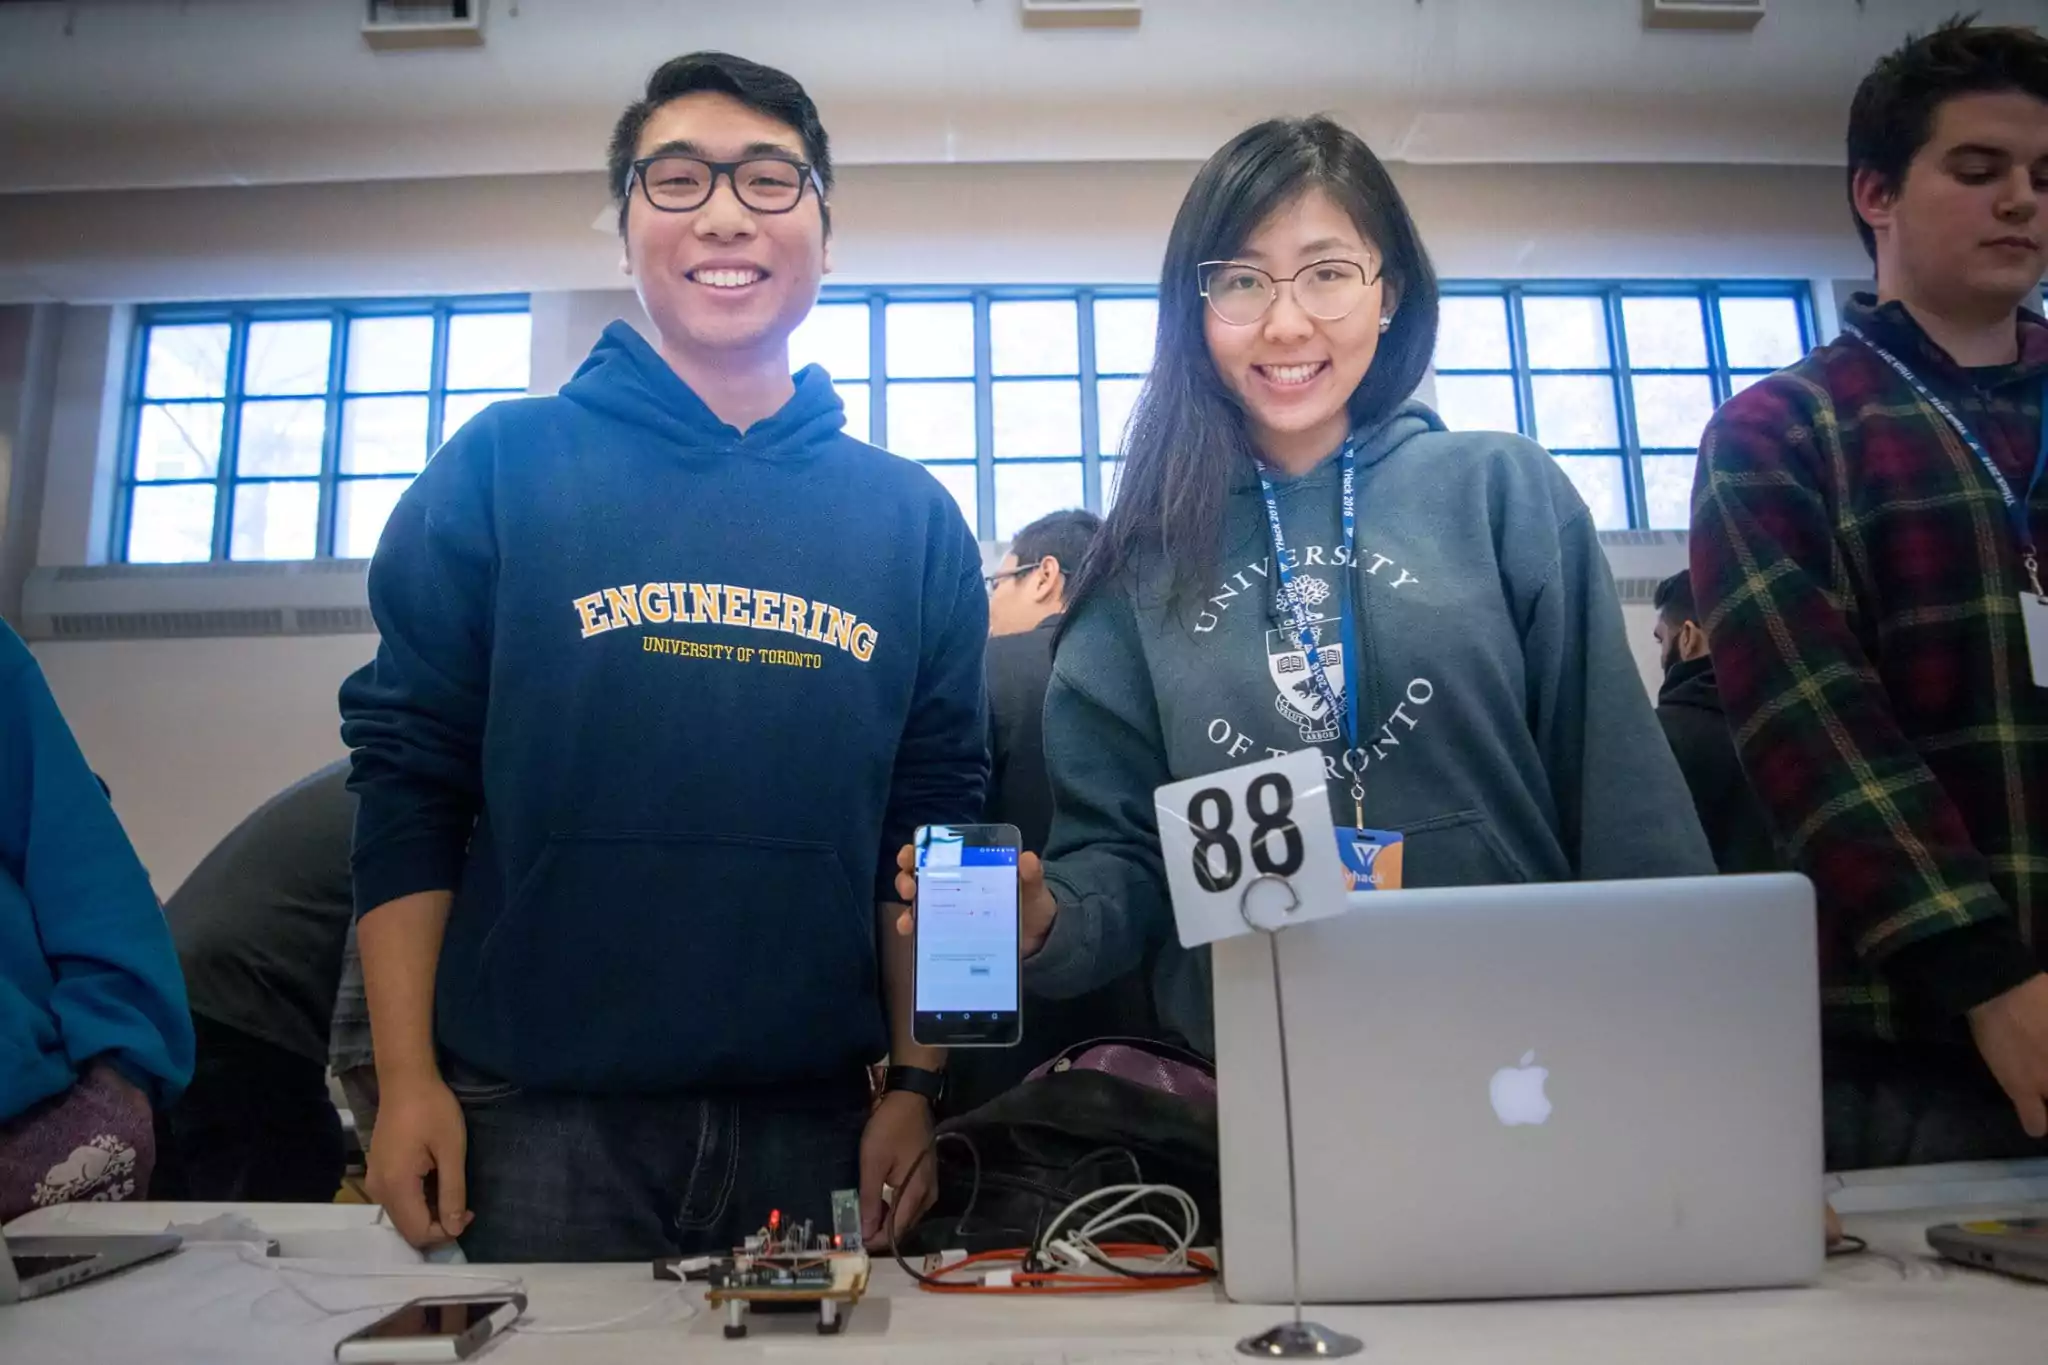 Two students at a Hackathon standing with an electronic device (Arduino, breadboard, wires), holding a phone with an app